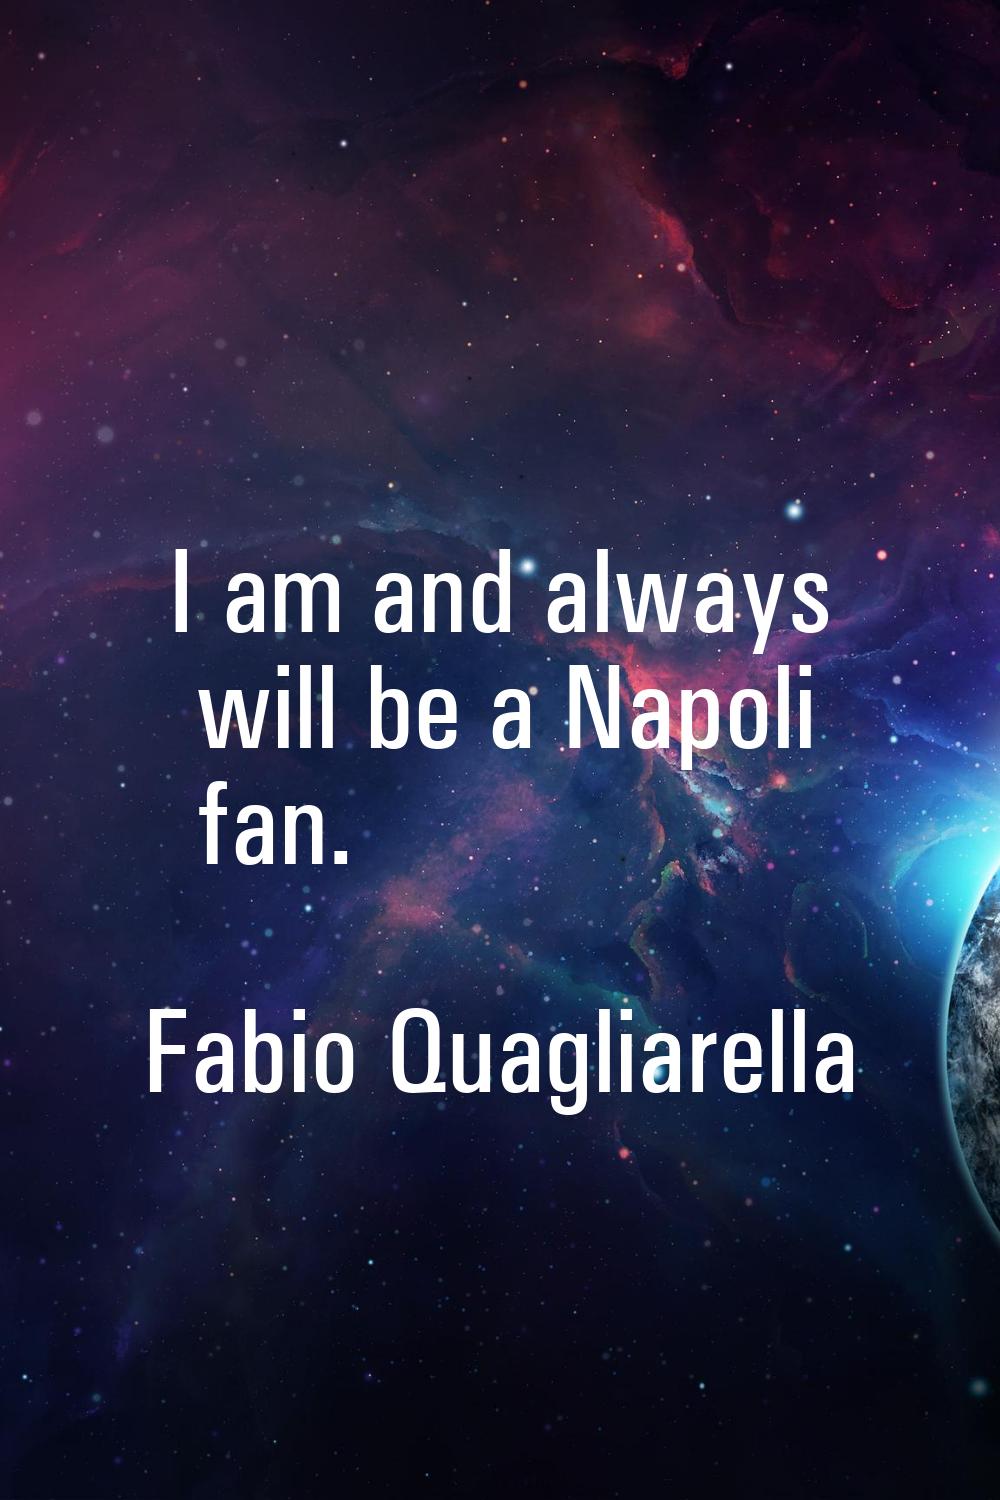 I am and always will be a Napoli fan.